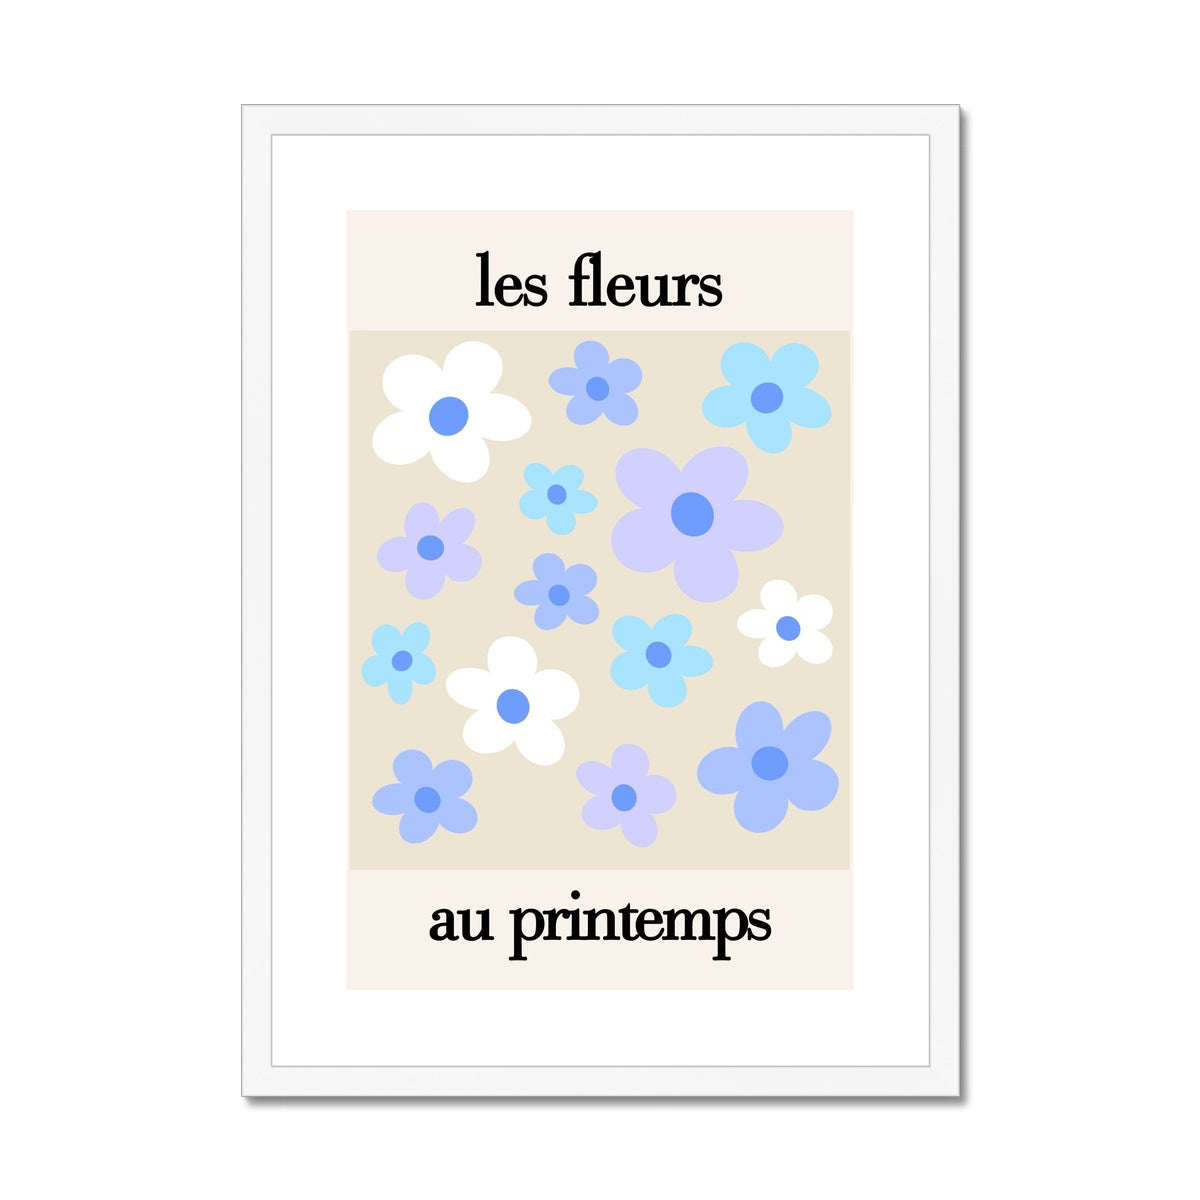 © les muses / Les Fleurs is a collection of danish pastel wall art full of colorful daisy flowers.
Covered in daisies, the Parisian art prints come in an array of dreamy pastels. A retro
flower poster perfect as aesthetic apartment and dorm decor.